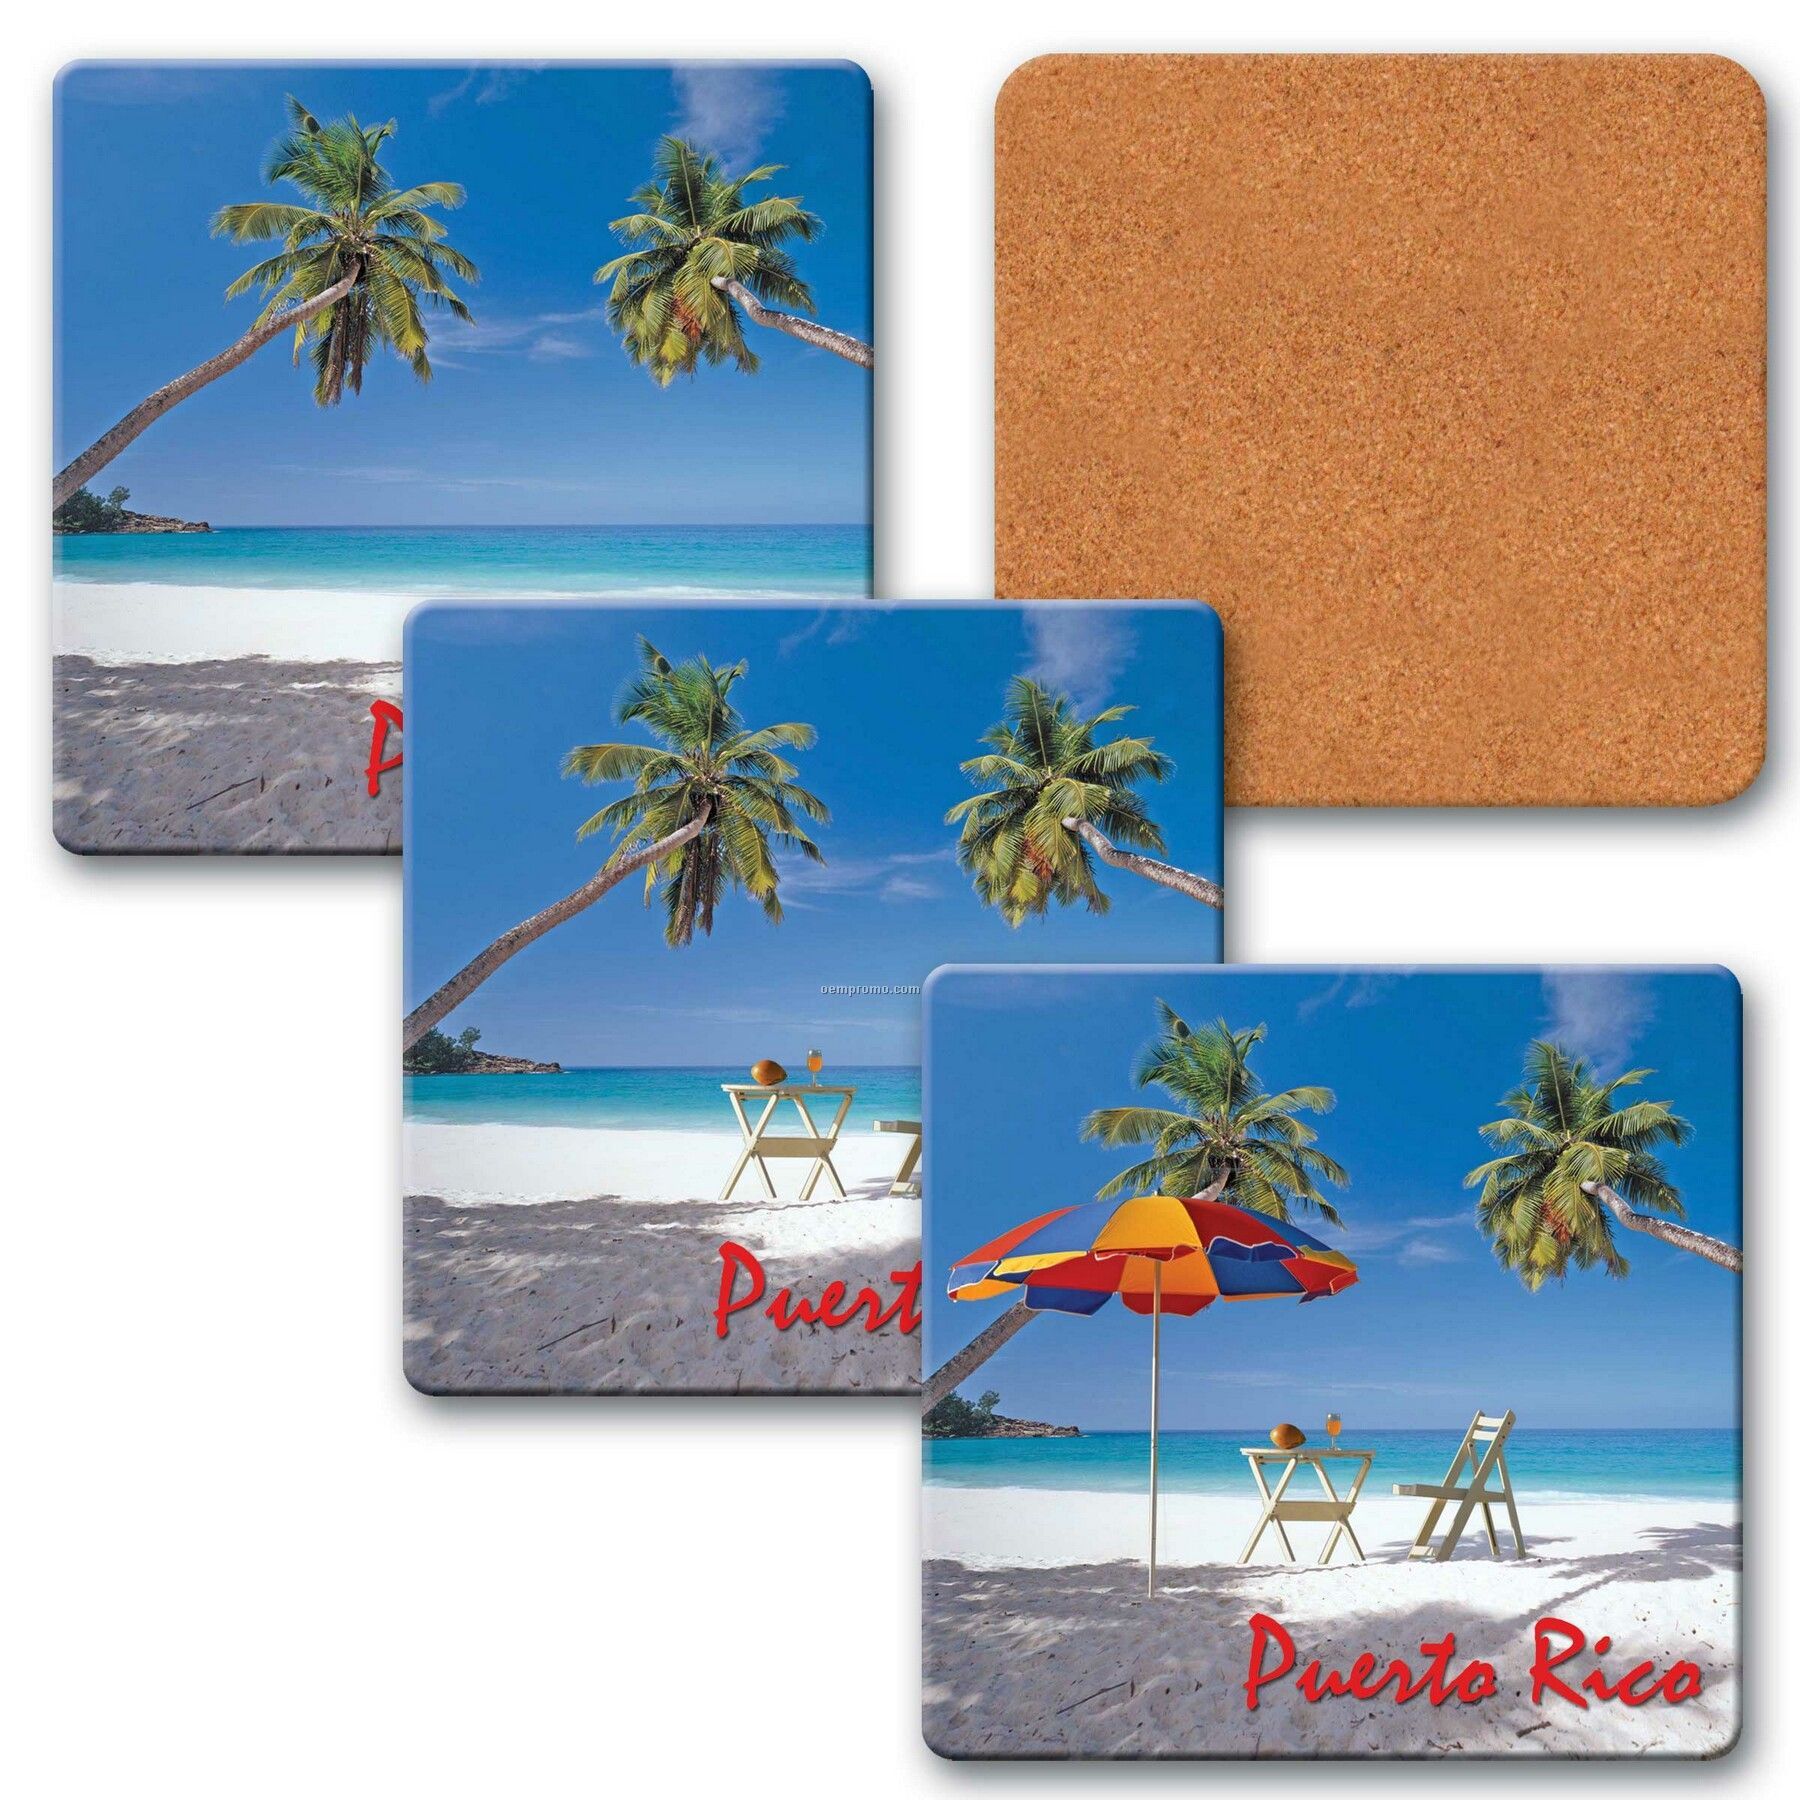 4" Square Coaster W/3d Lenticular Images Of A Tropical Beach (Imprinted)